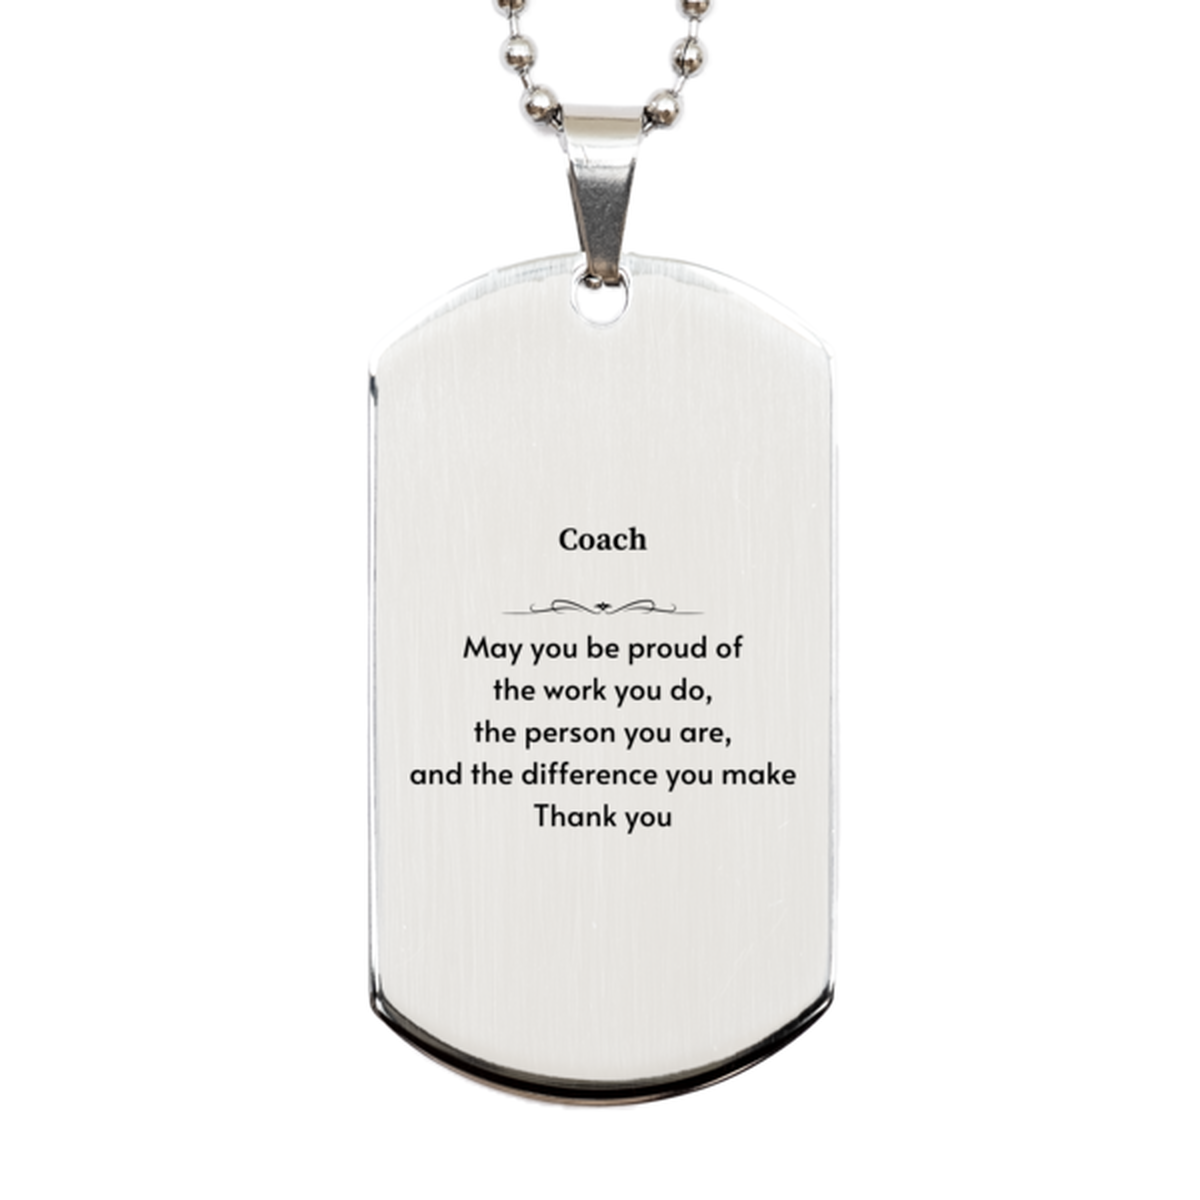 Heartwarming Silver Dog Tag Retirement Coworkers Gifts for Coach, Coach May You be proud of the work you do, the person you are Gifts for Boss Men Women Friends